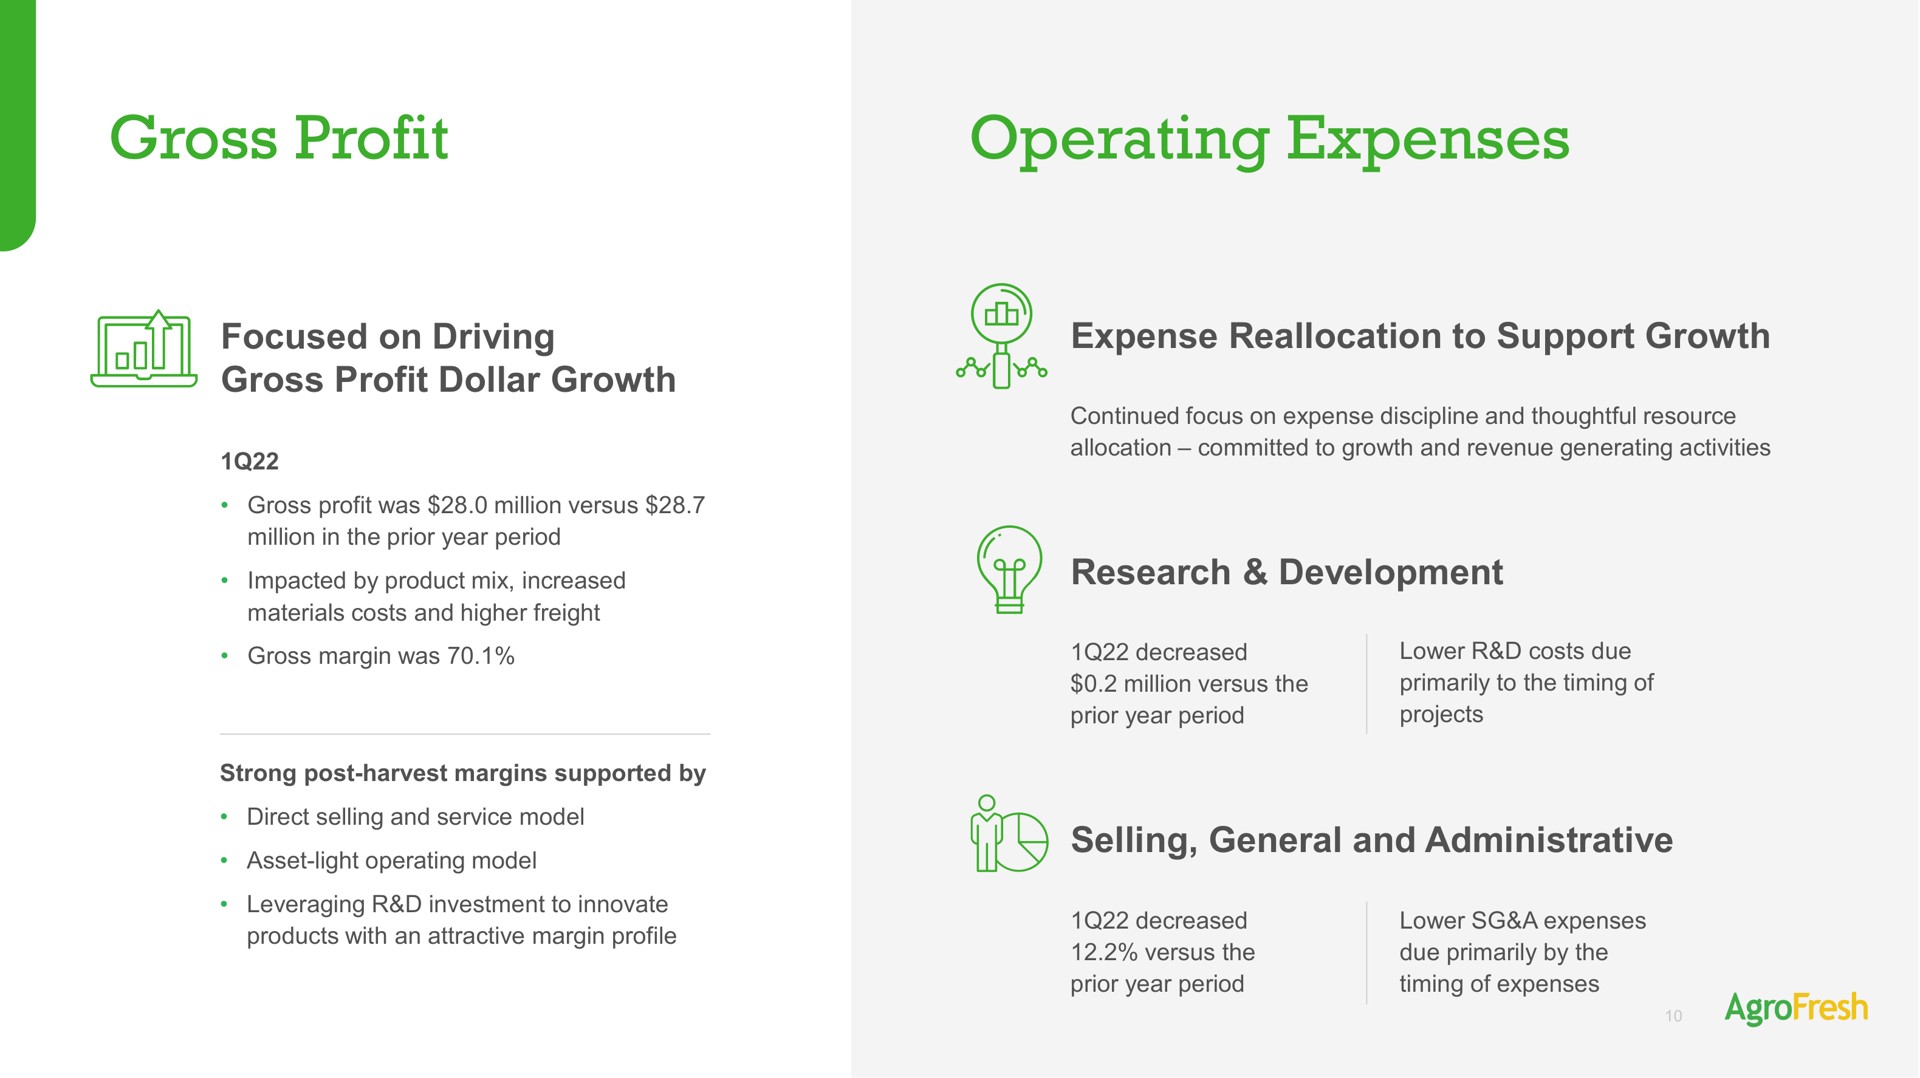 gross profit operating expenses focused on driving gross profit dollar growth expense reallocation to support growth research development selling general and administrative | AgroFresh